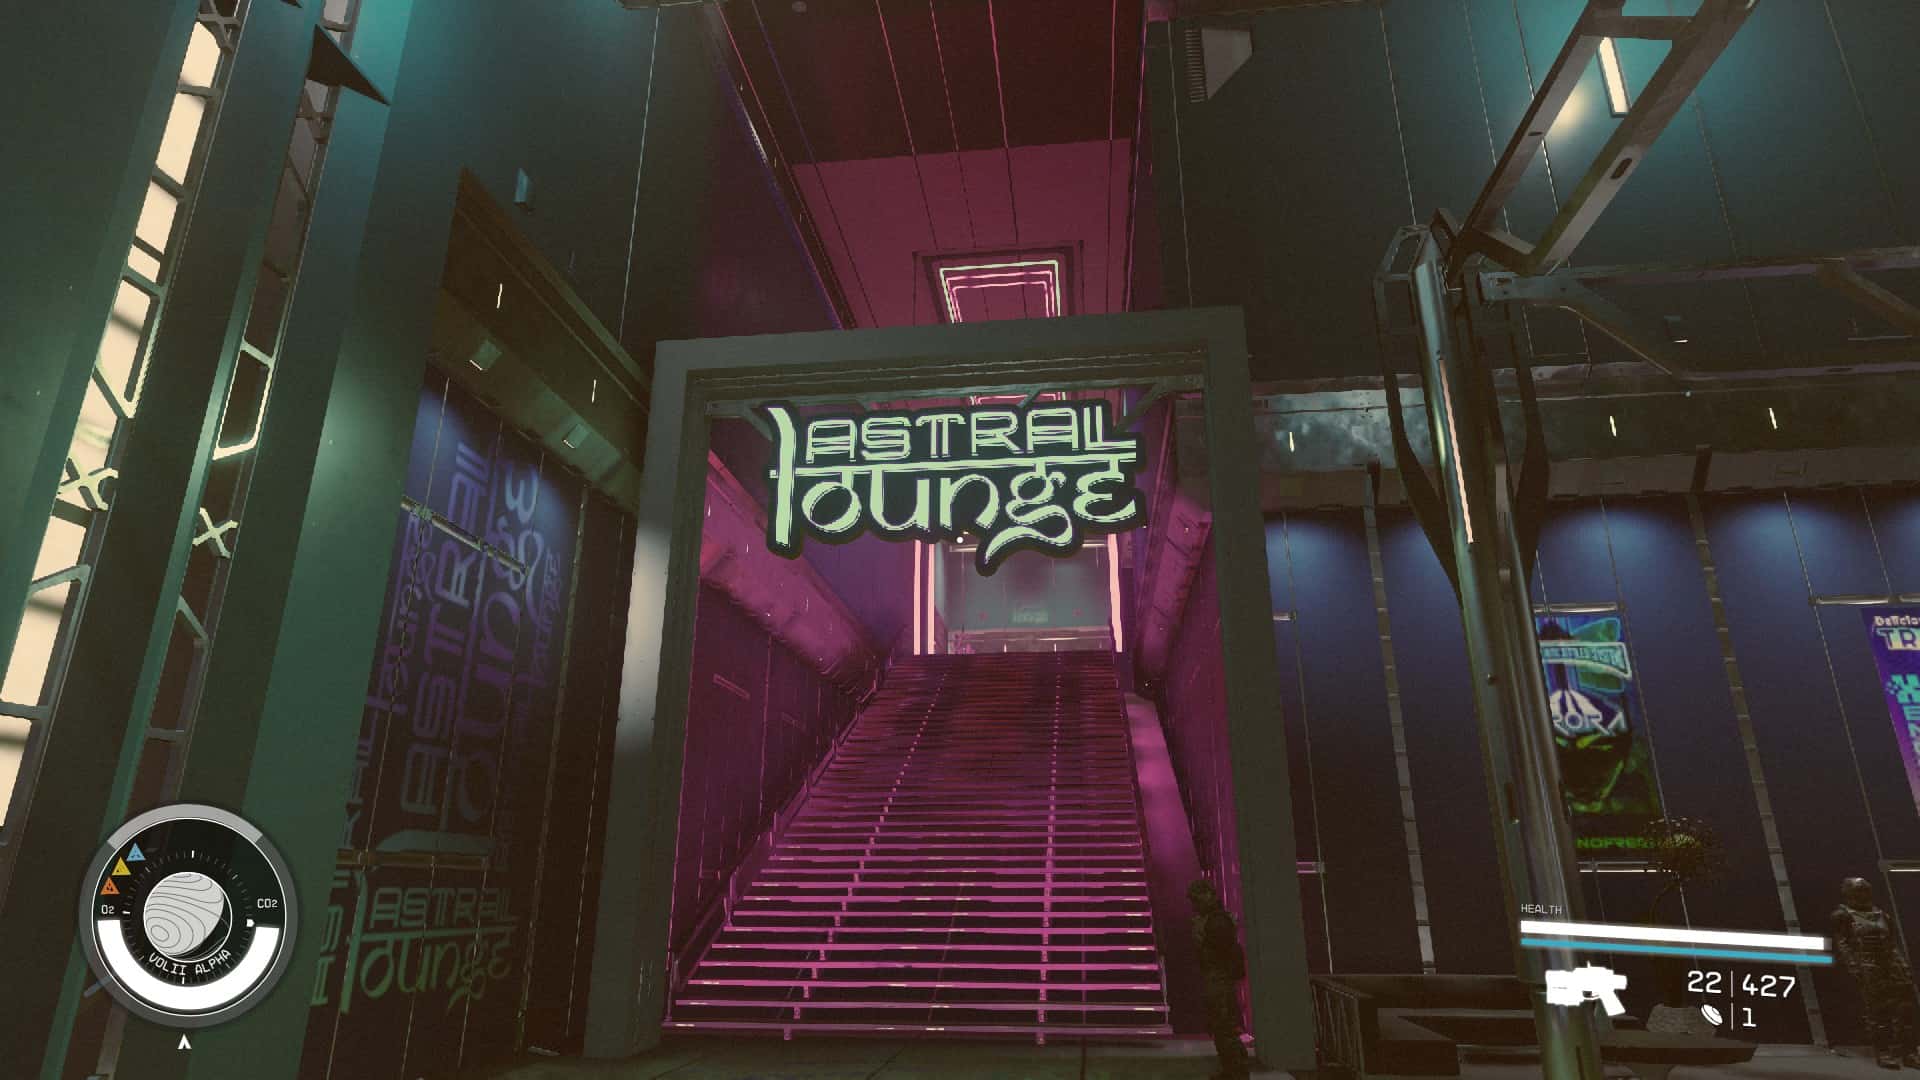 Starfield Neon shops: The entrance to Neon's Astral Lounge.